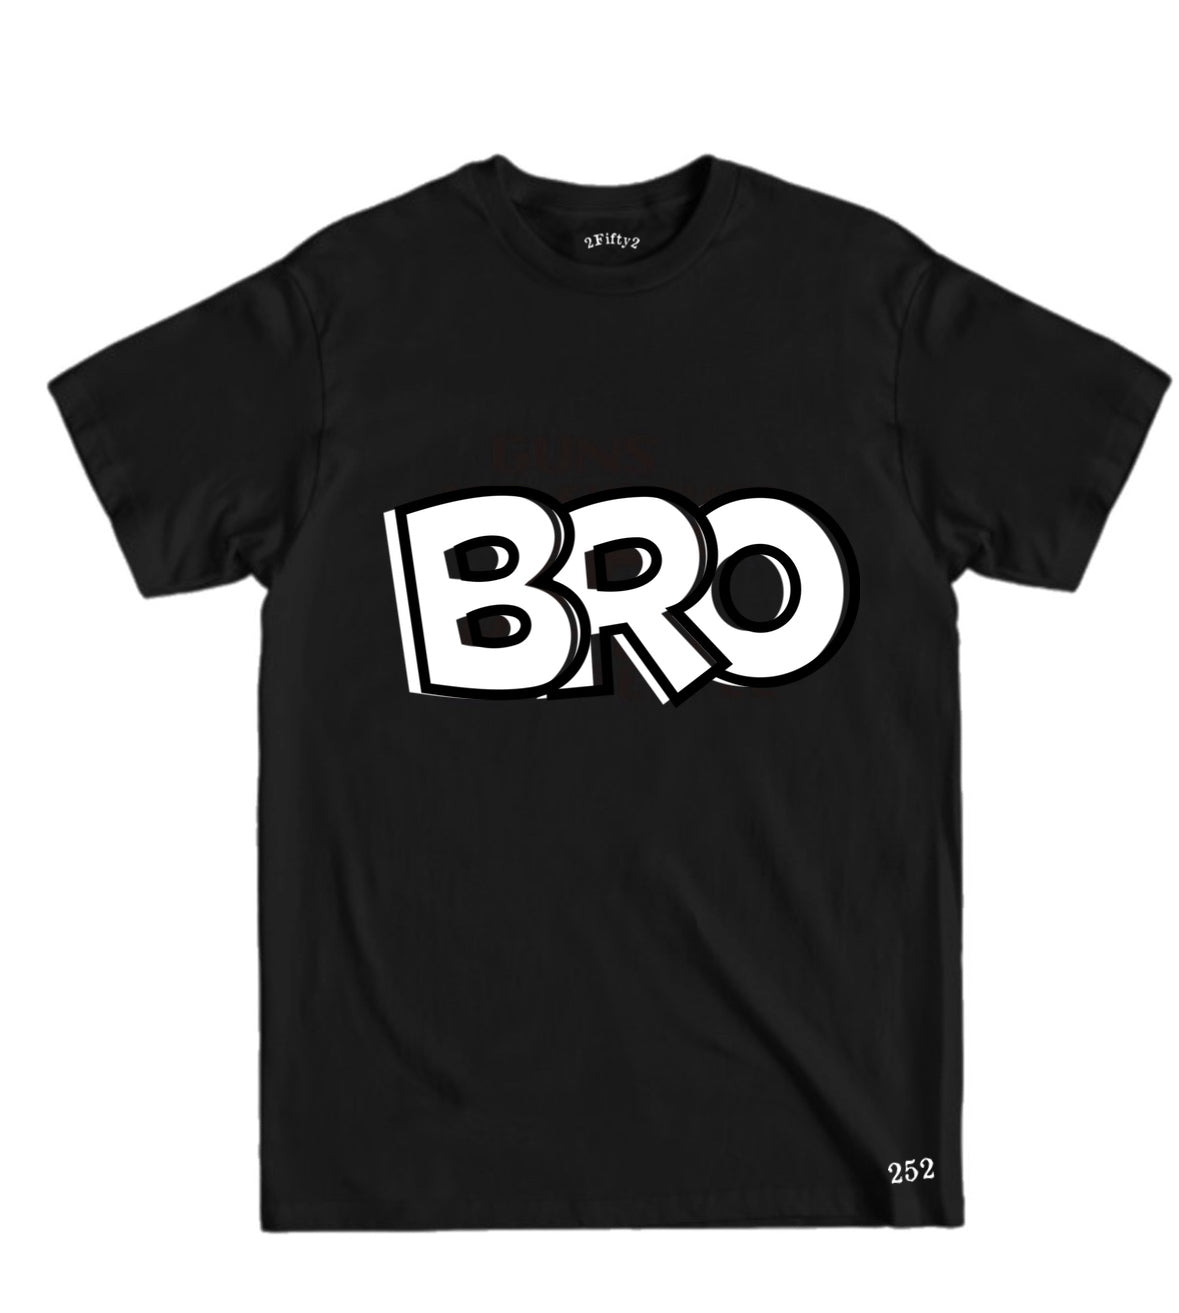 Boys (Bro) tees by The 2Fifty2 Brand